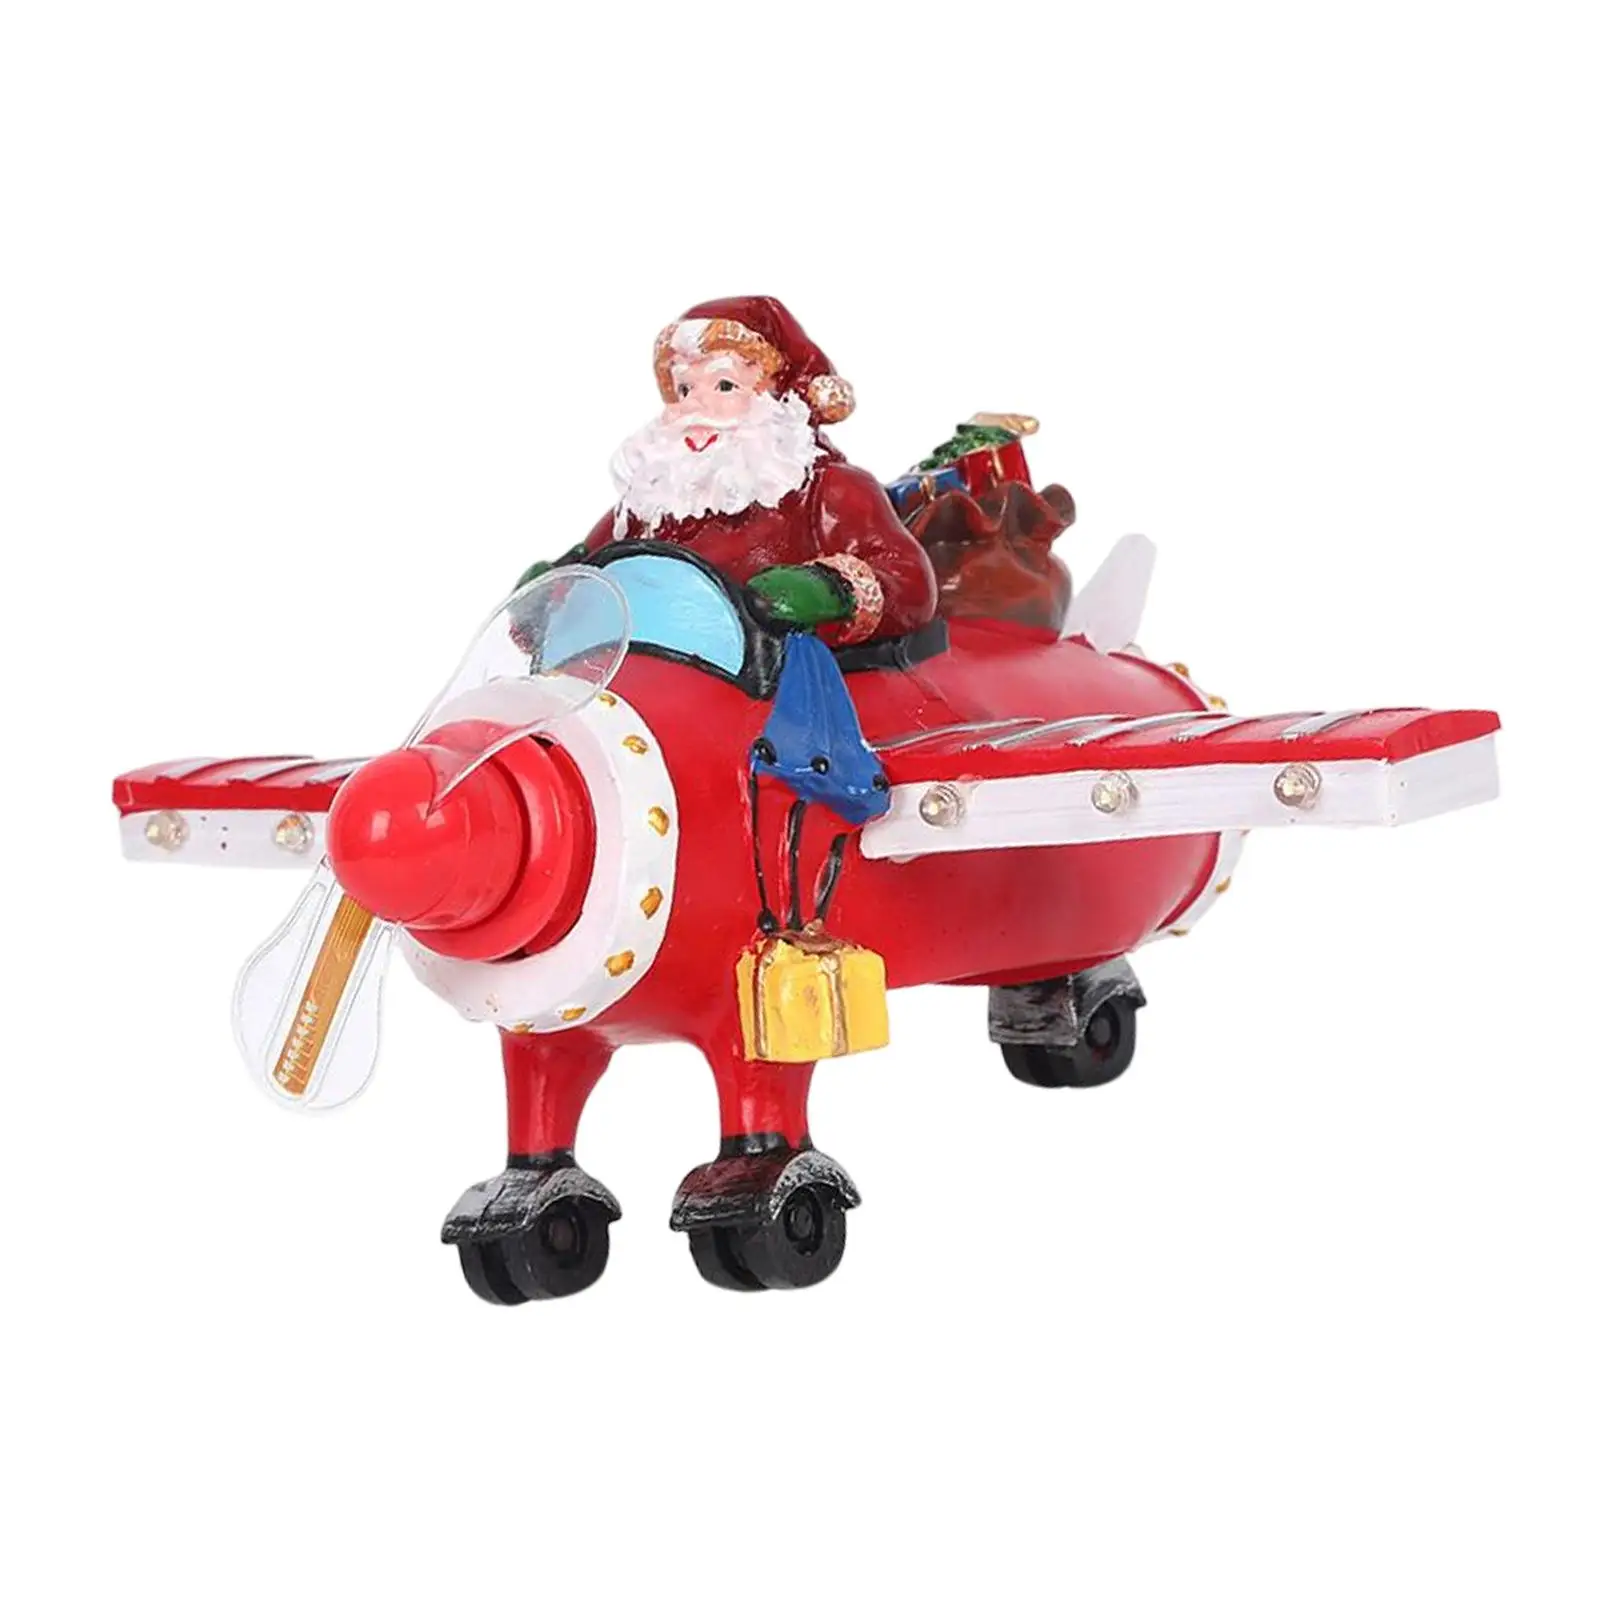 

Santa Flying Plane Decoration Resin Craft Miniature Luminous Light up Ornaments for Holiday Party Office Celebration Home Decor